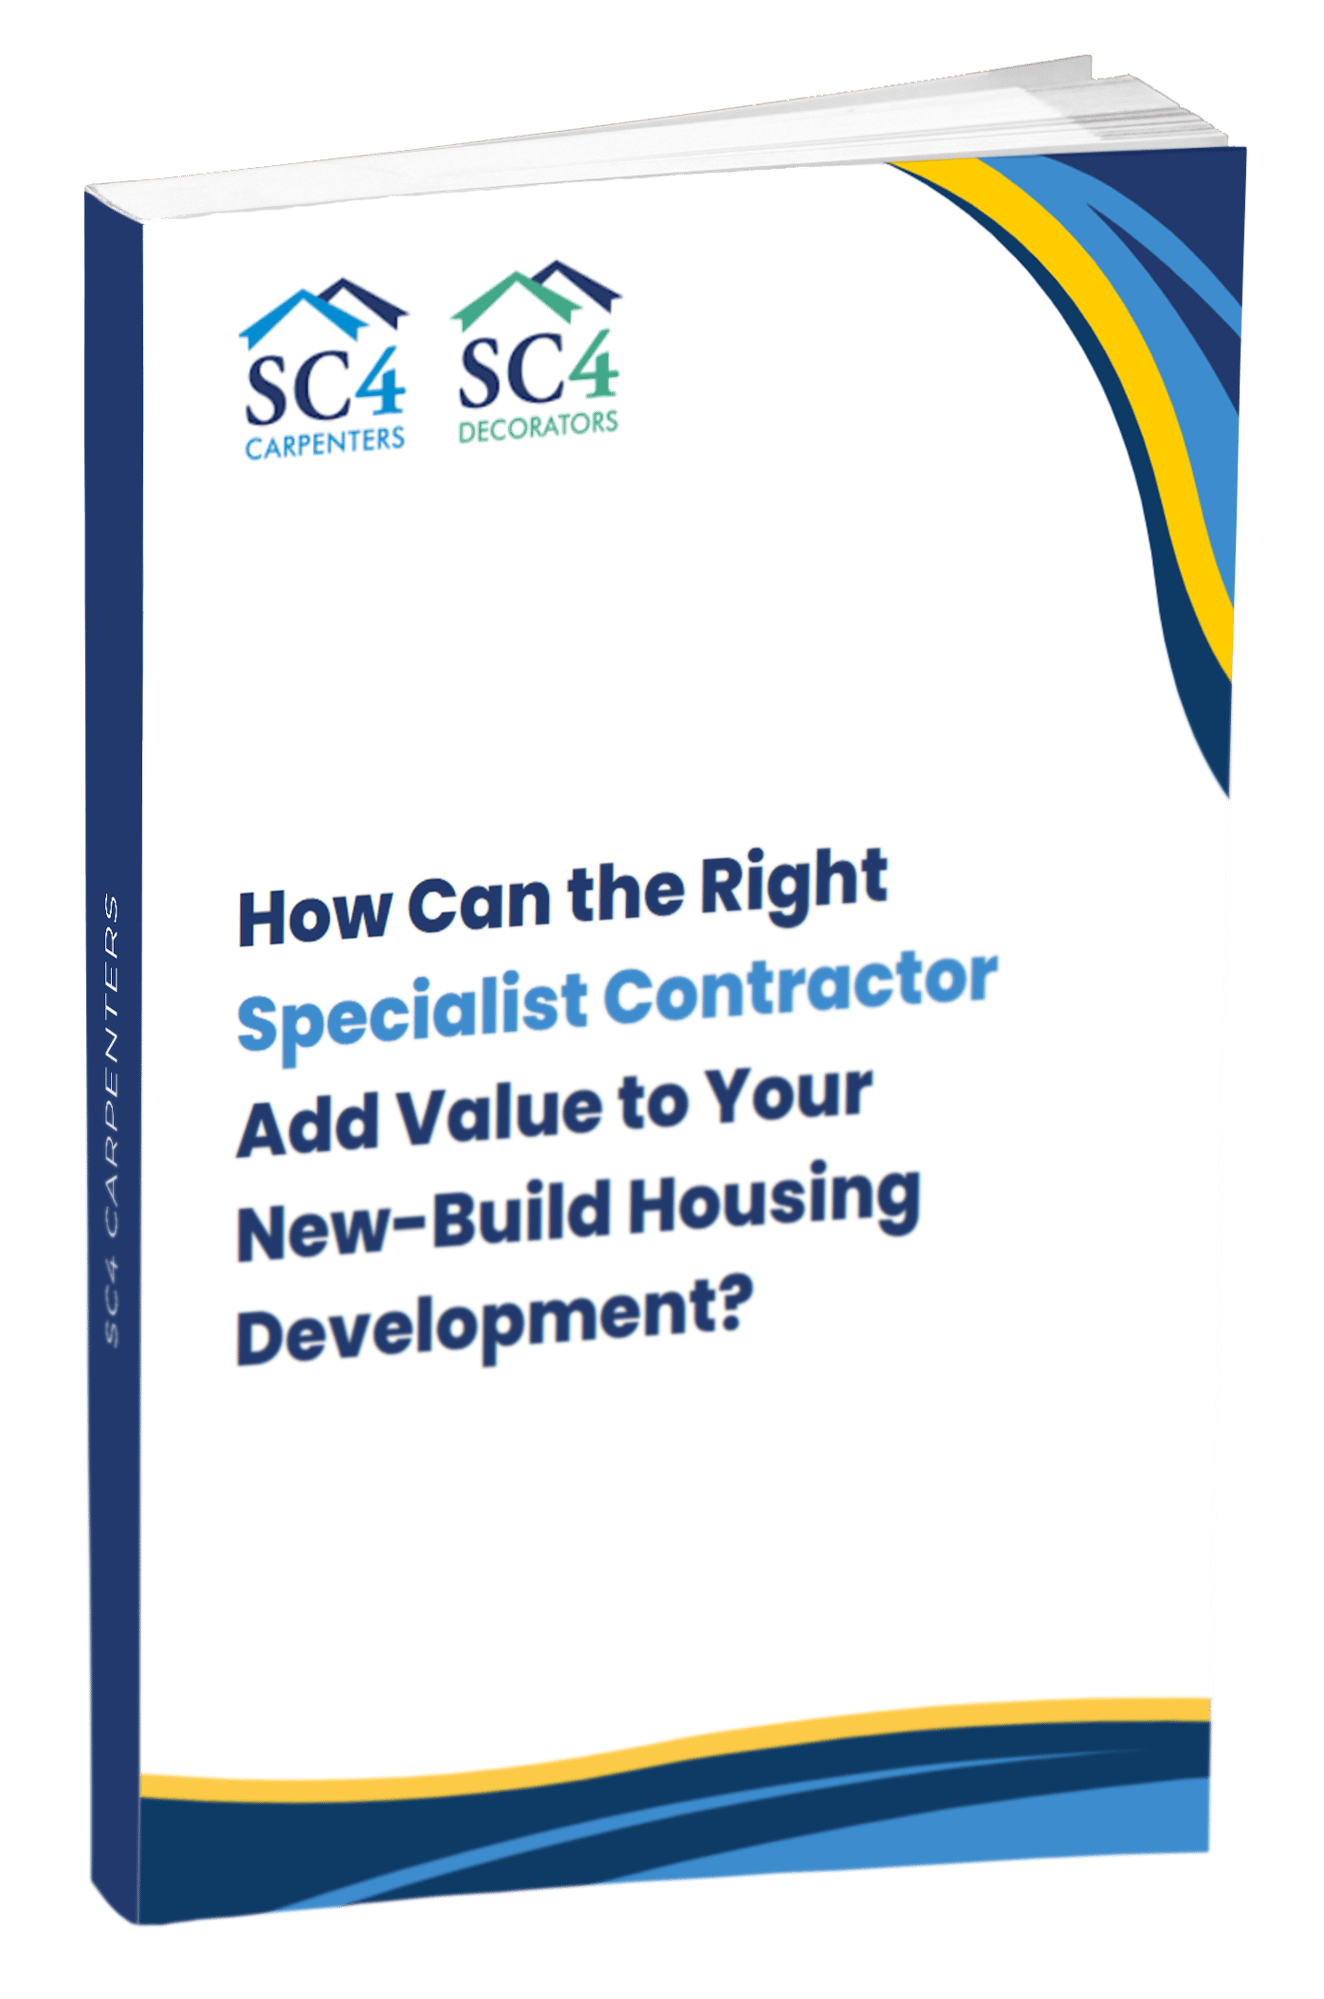 SC4 Carpenters - How the right specialist contractor can add value to your new-build housing development free guide